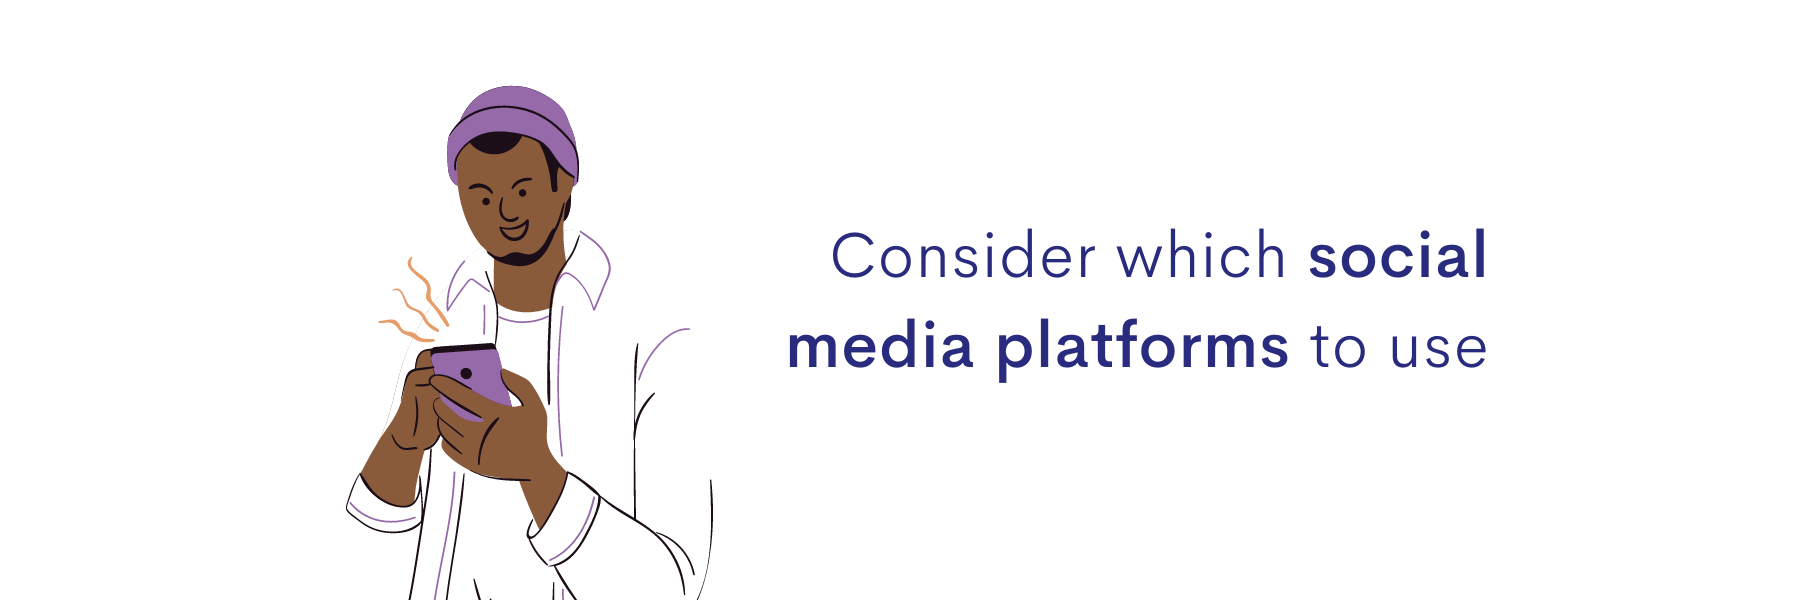 Consider which social media platforms to use